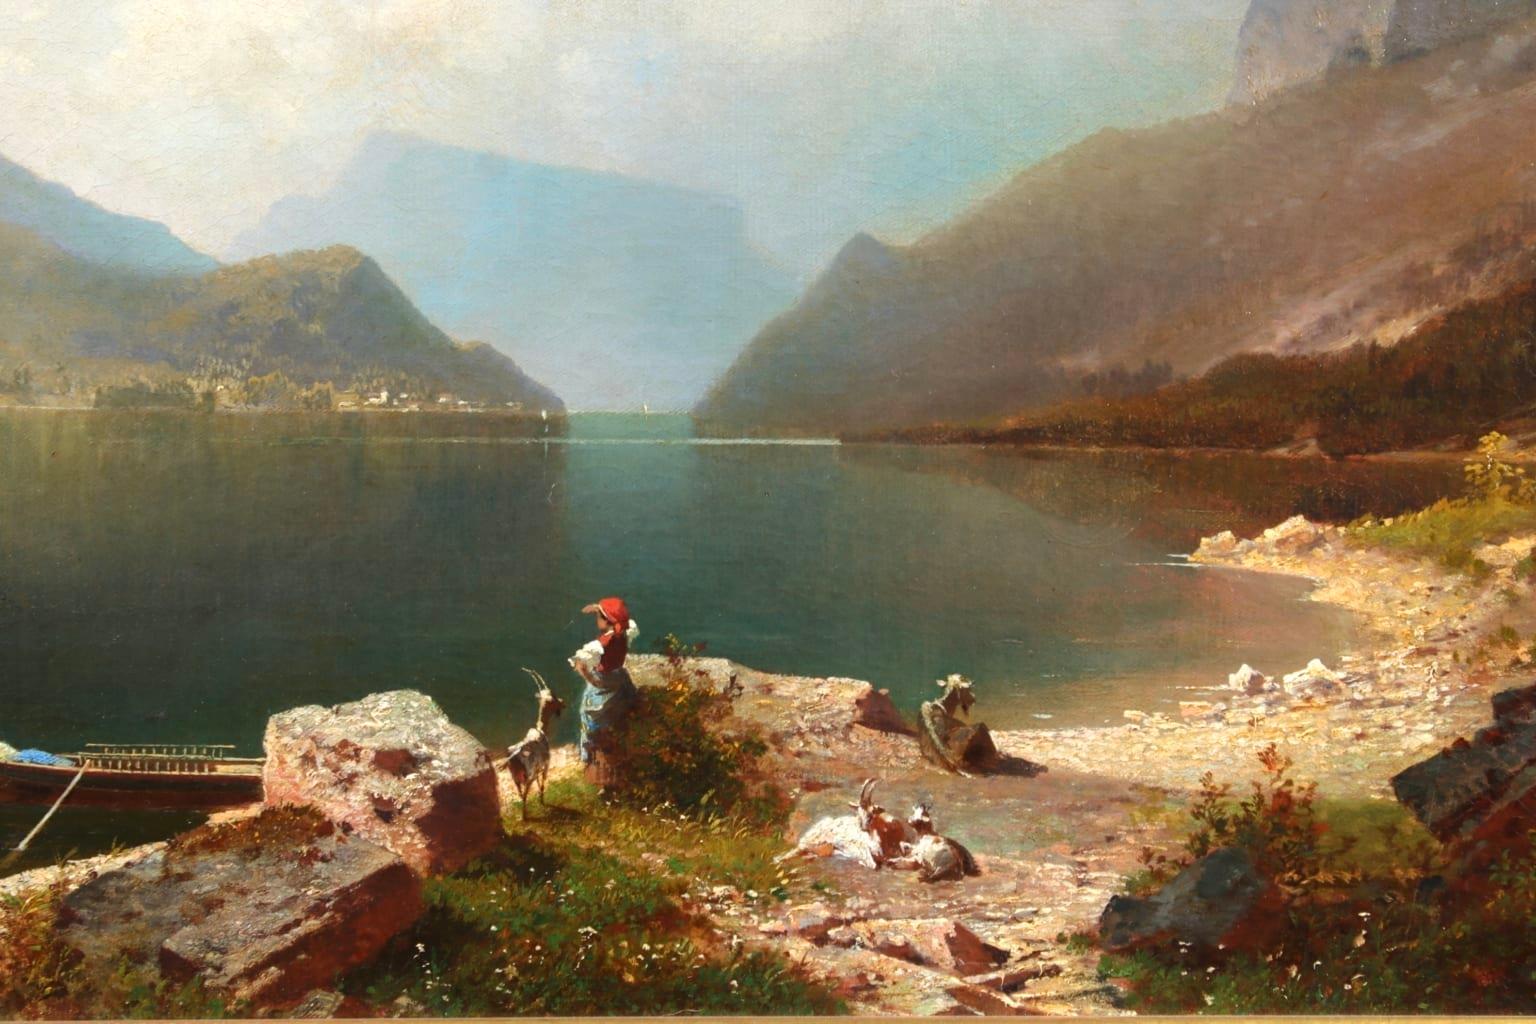 Early Morning-Achen Lake, Austria - Romantic Oil, Figures by Lake by Unterberger - Gray Landscape Painting by Franz Richard Unterberger